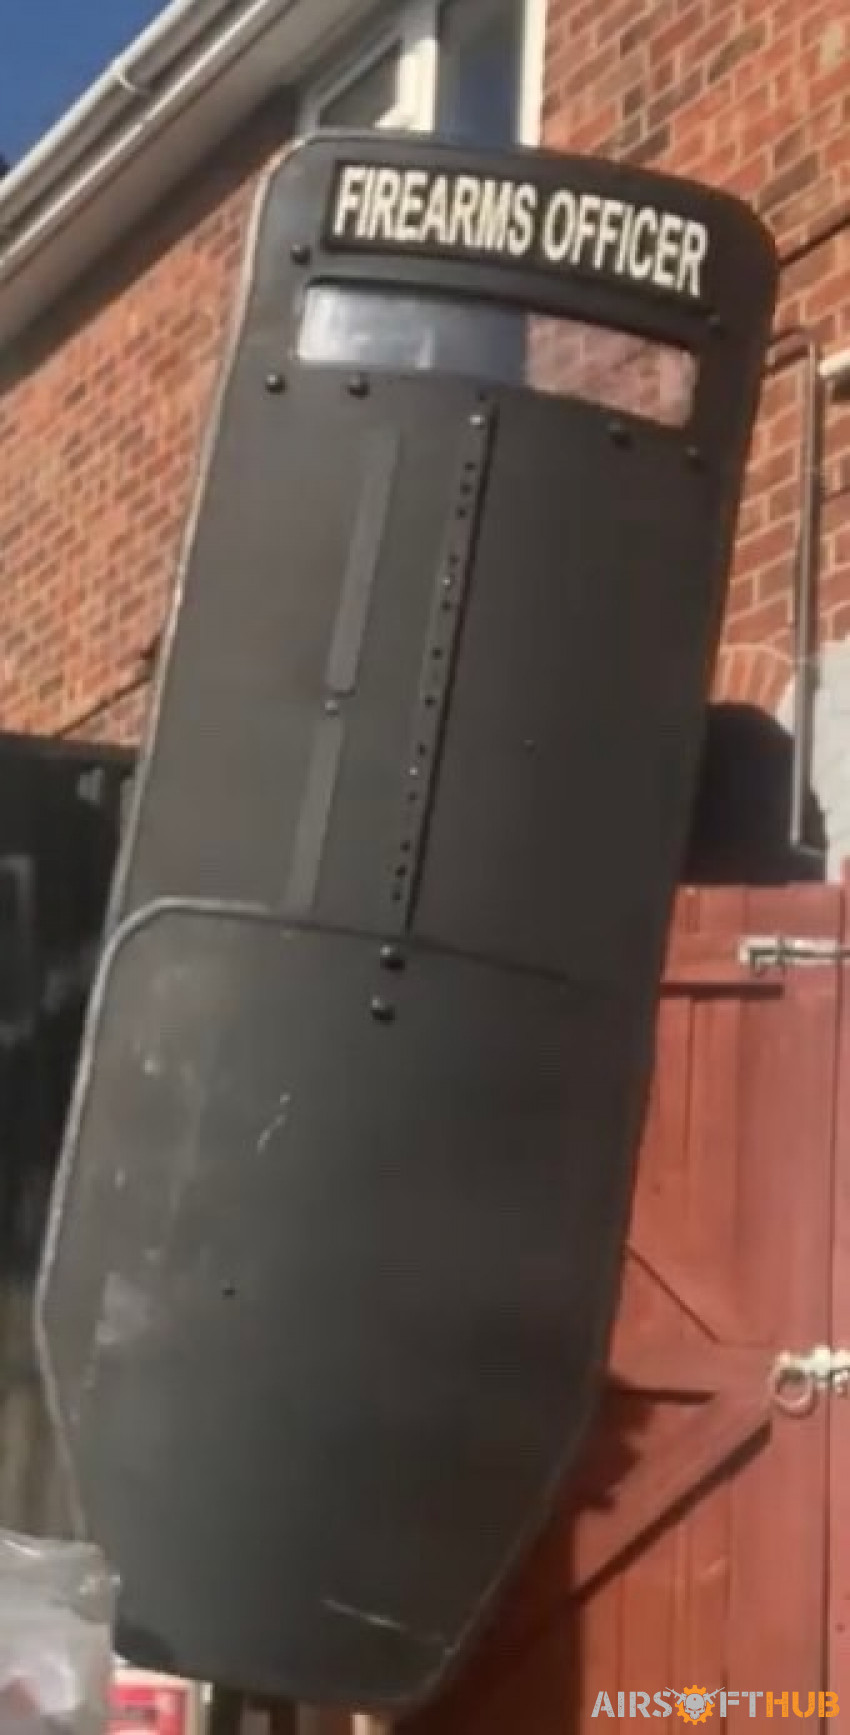 Real ballistic shield - Used airsoft equipment